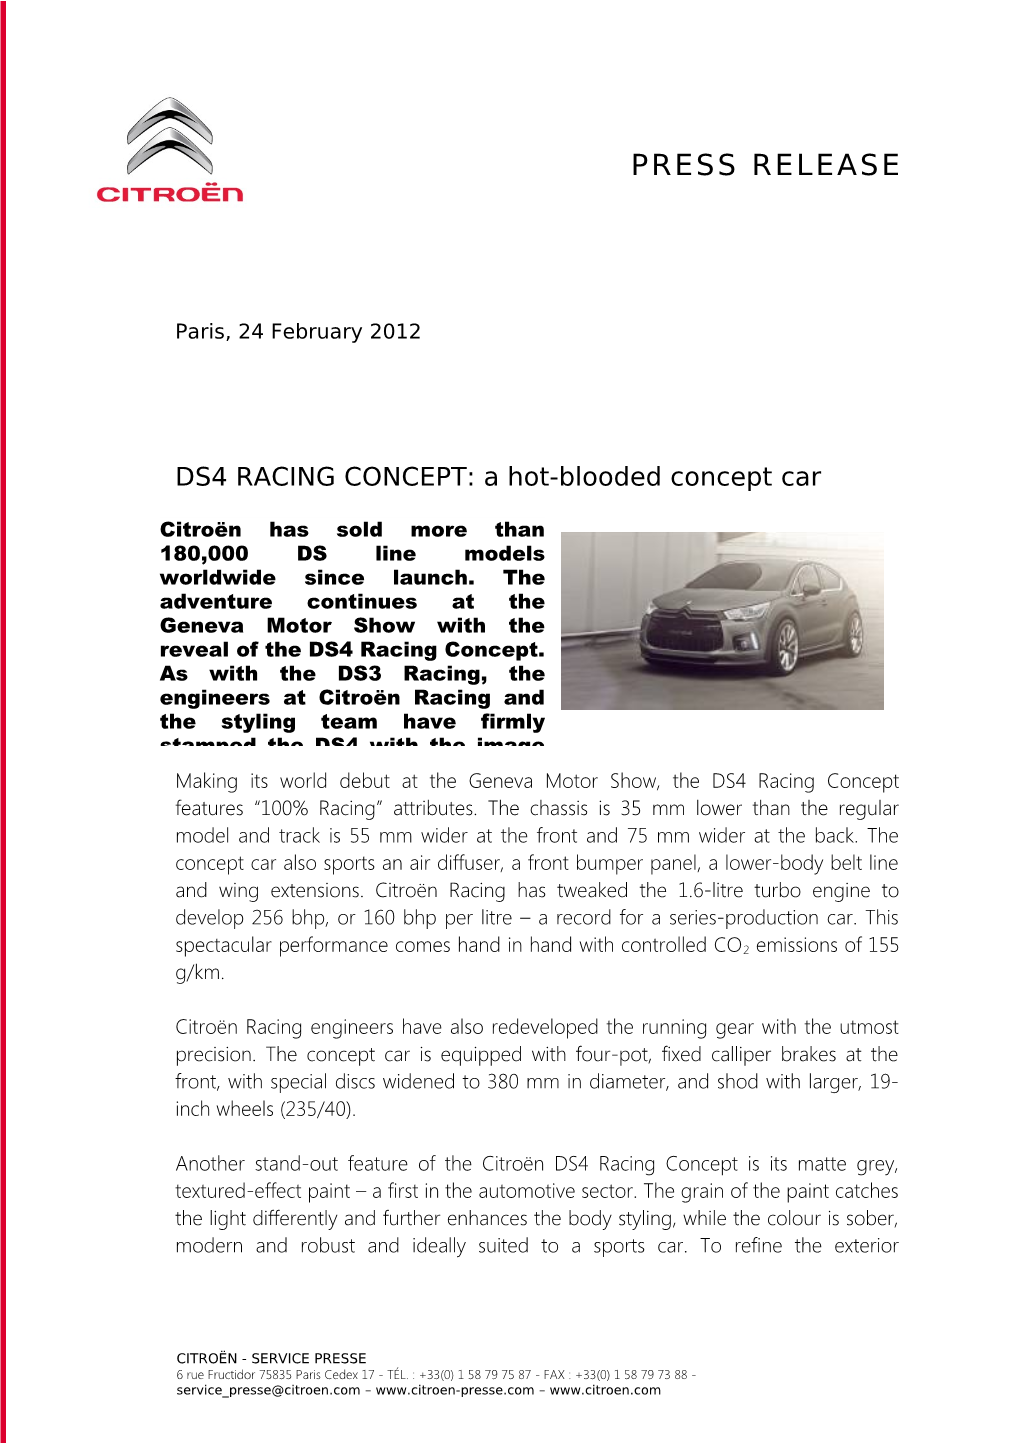 DS4 RACING CONCEPT: a Hot-Blooded Concept Car